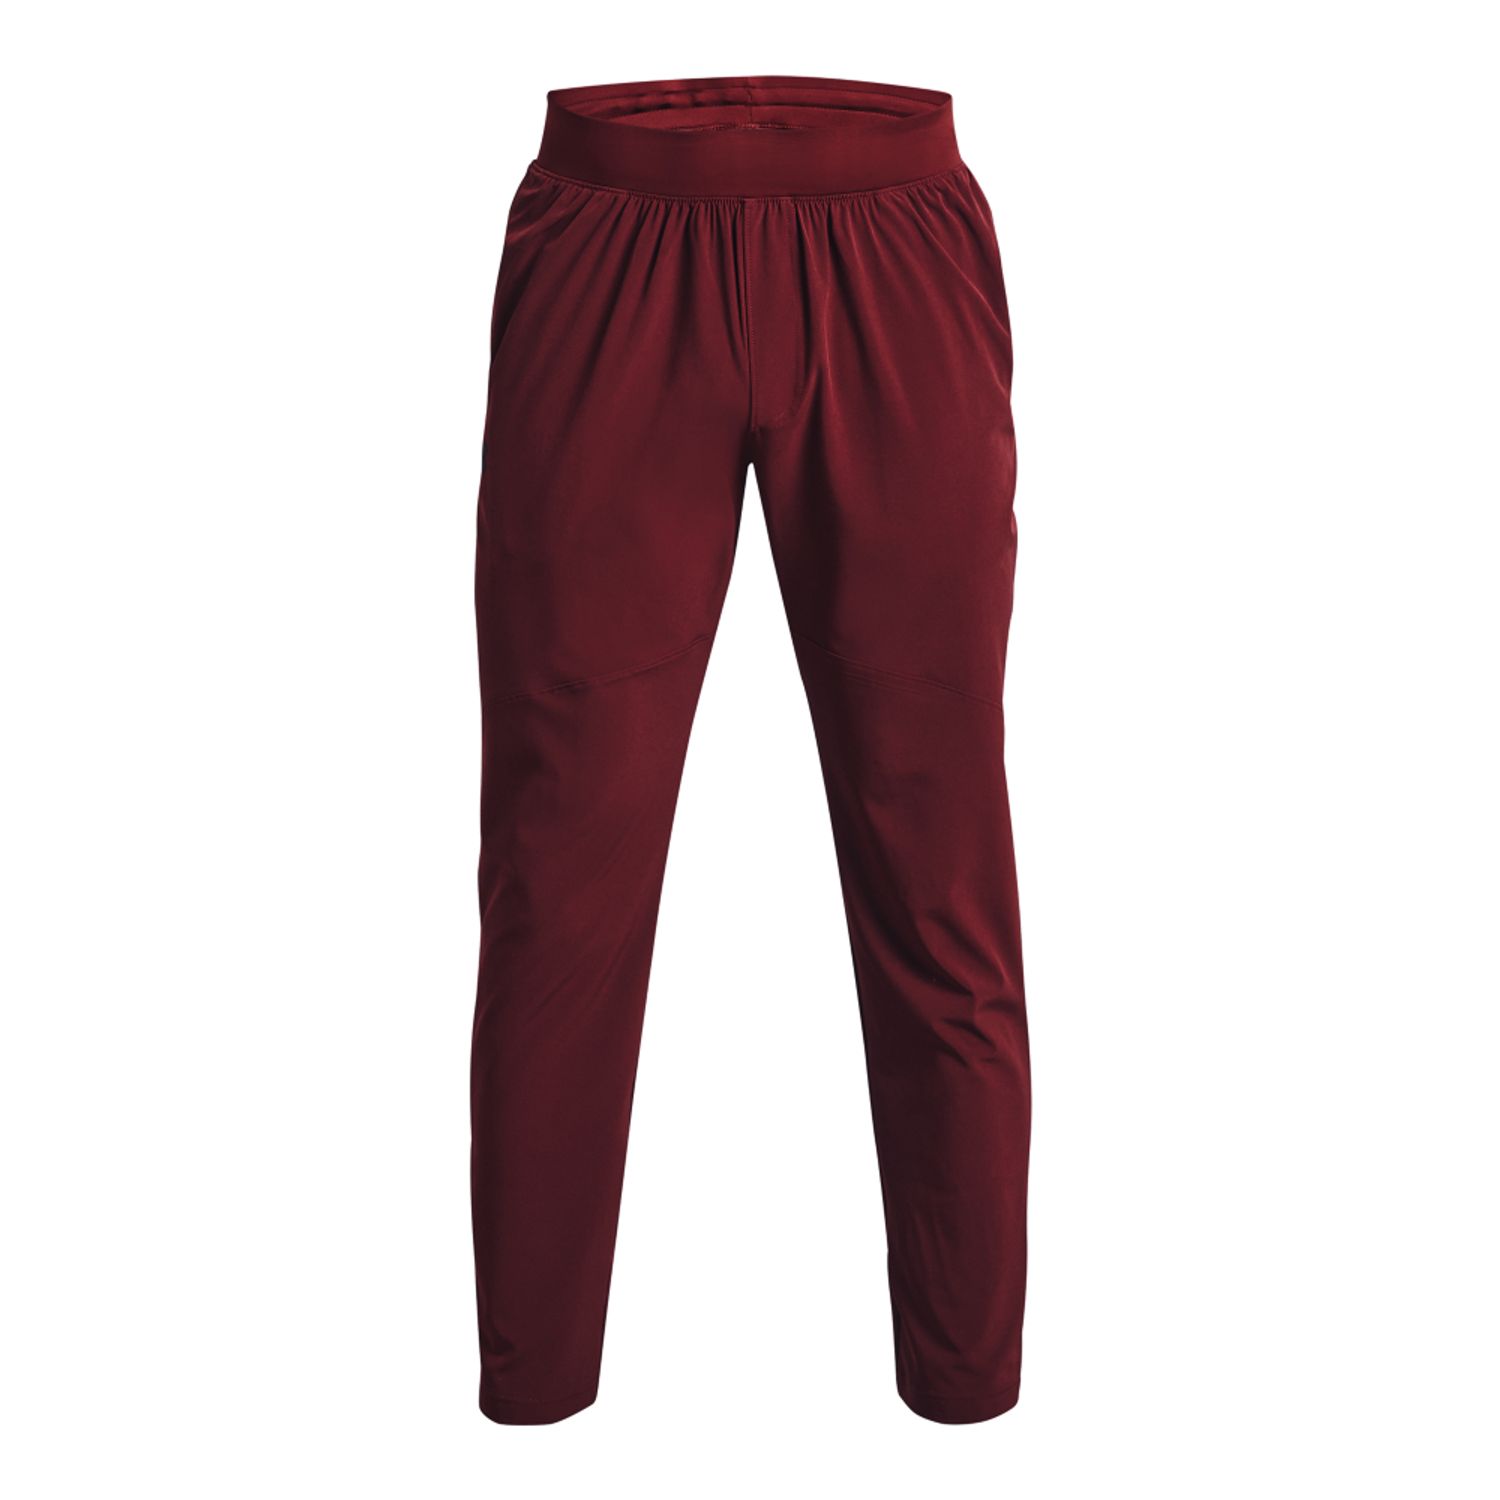 Size Large- Under Armour Men’s UA Stretch Woven Pant, Red